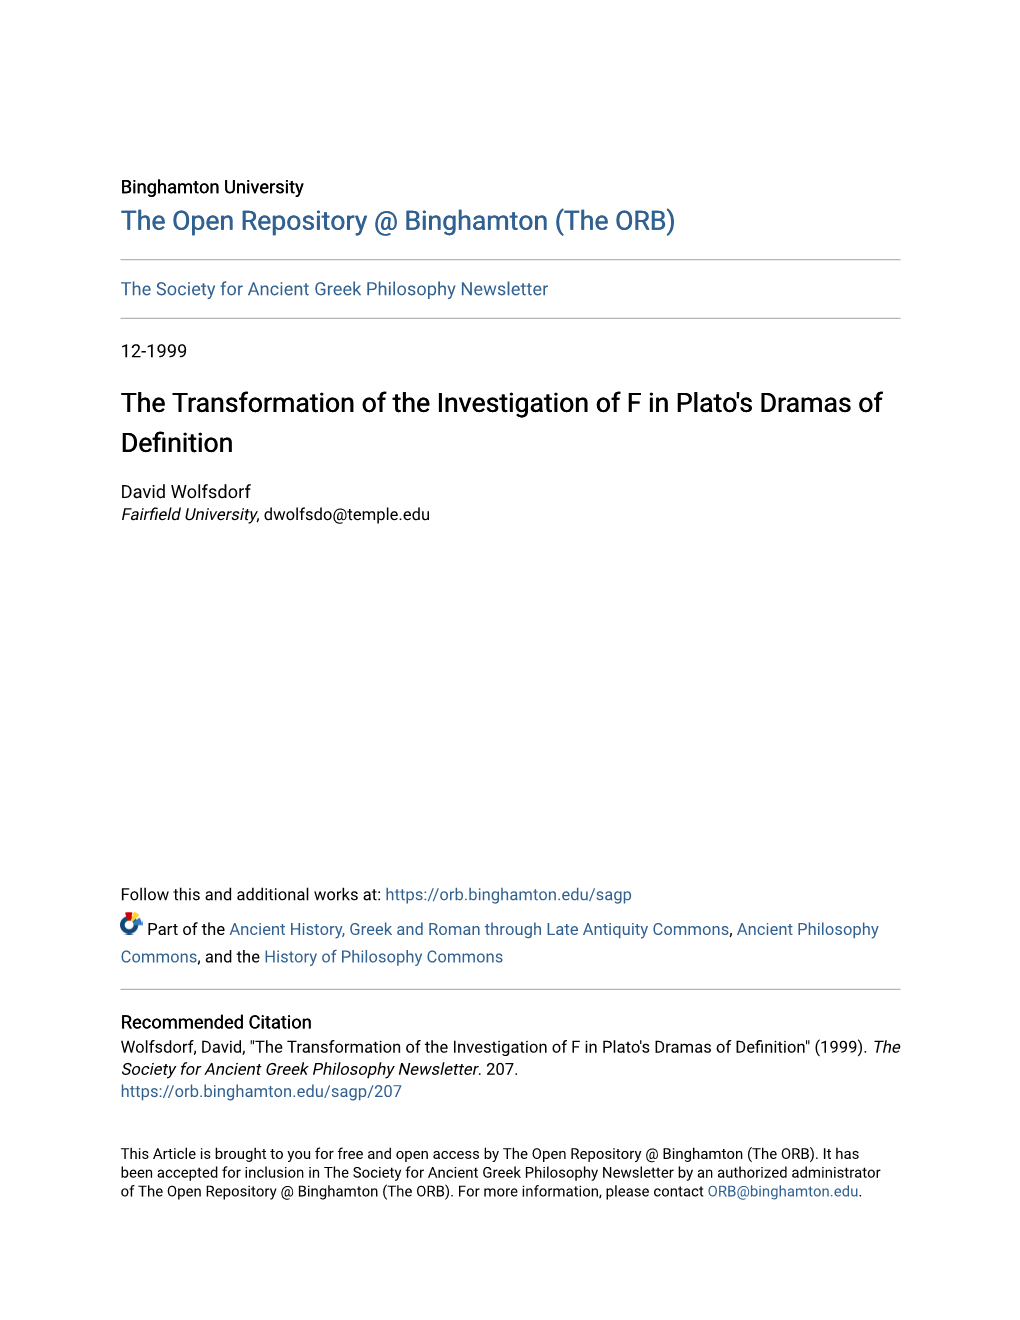 The Transformation of the Investigation of F in Plato's Dramas of Definition